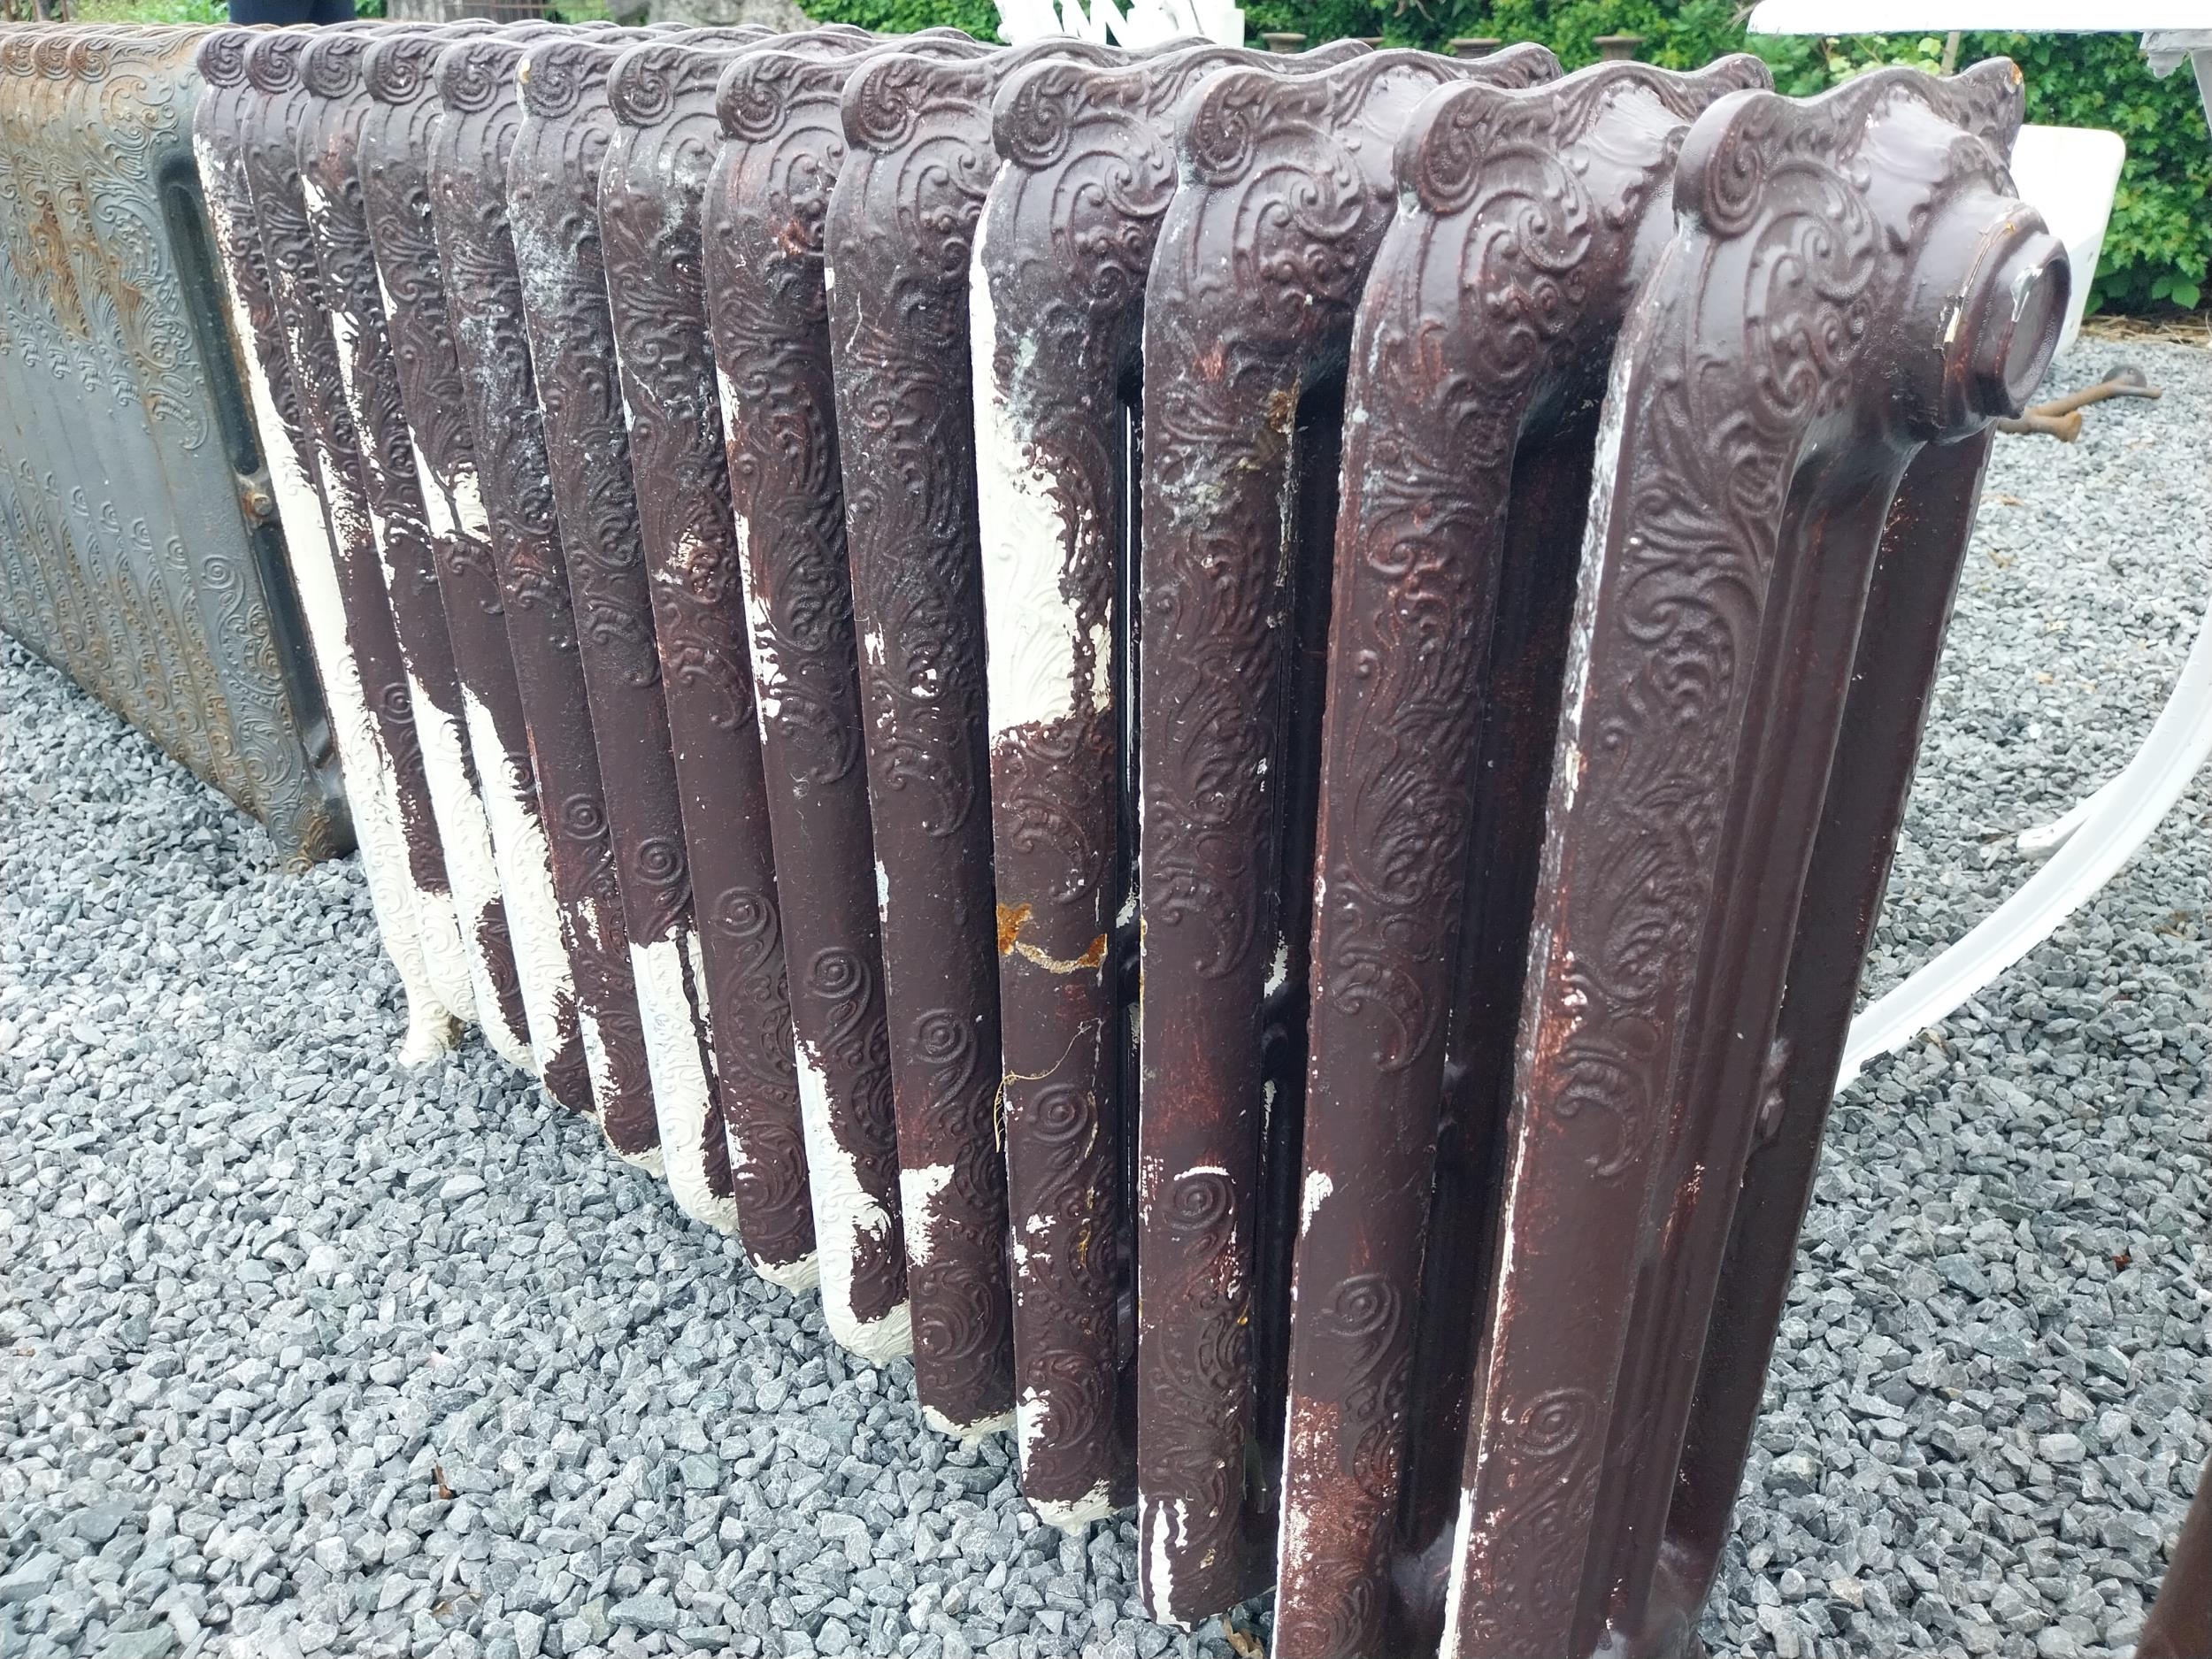 Two decorative cast iron radiators in the Victorian style - taken out working {74 cm H x 108 cm W - Image 2 of 3